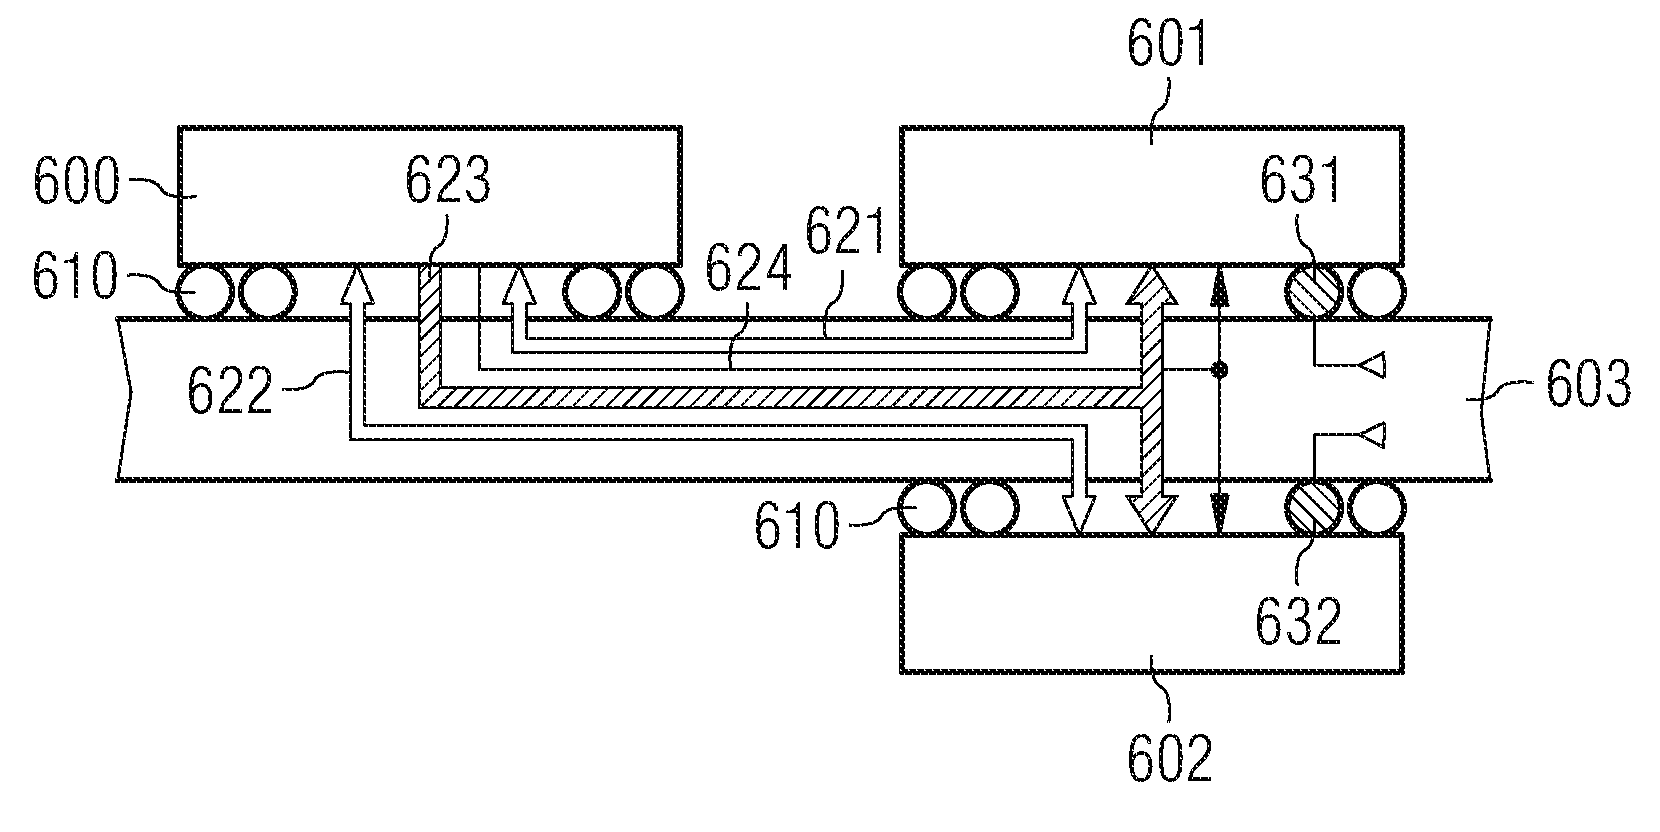 Evaluation unit in an integrated circuit